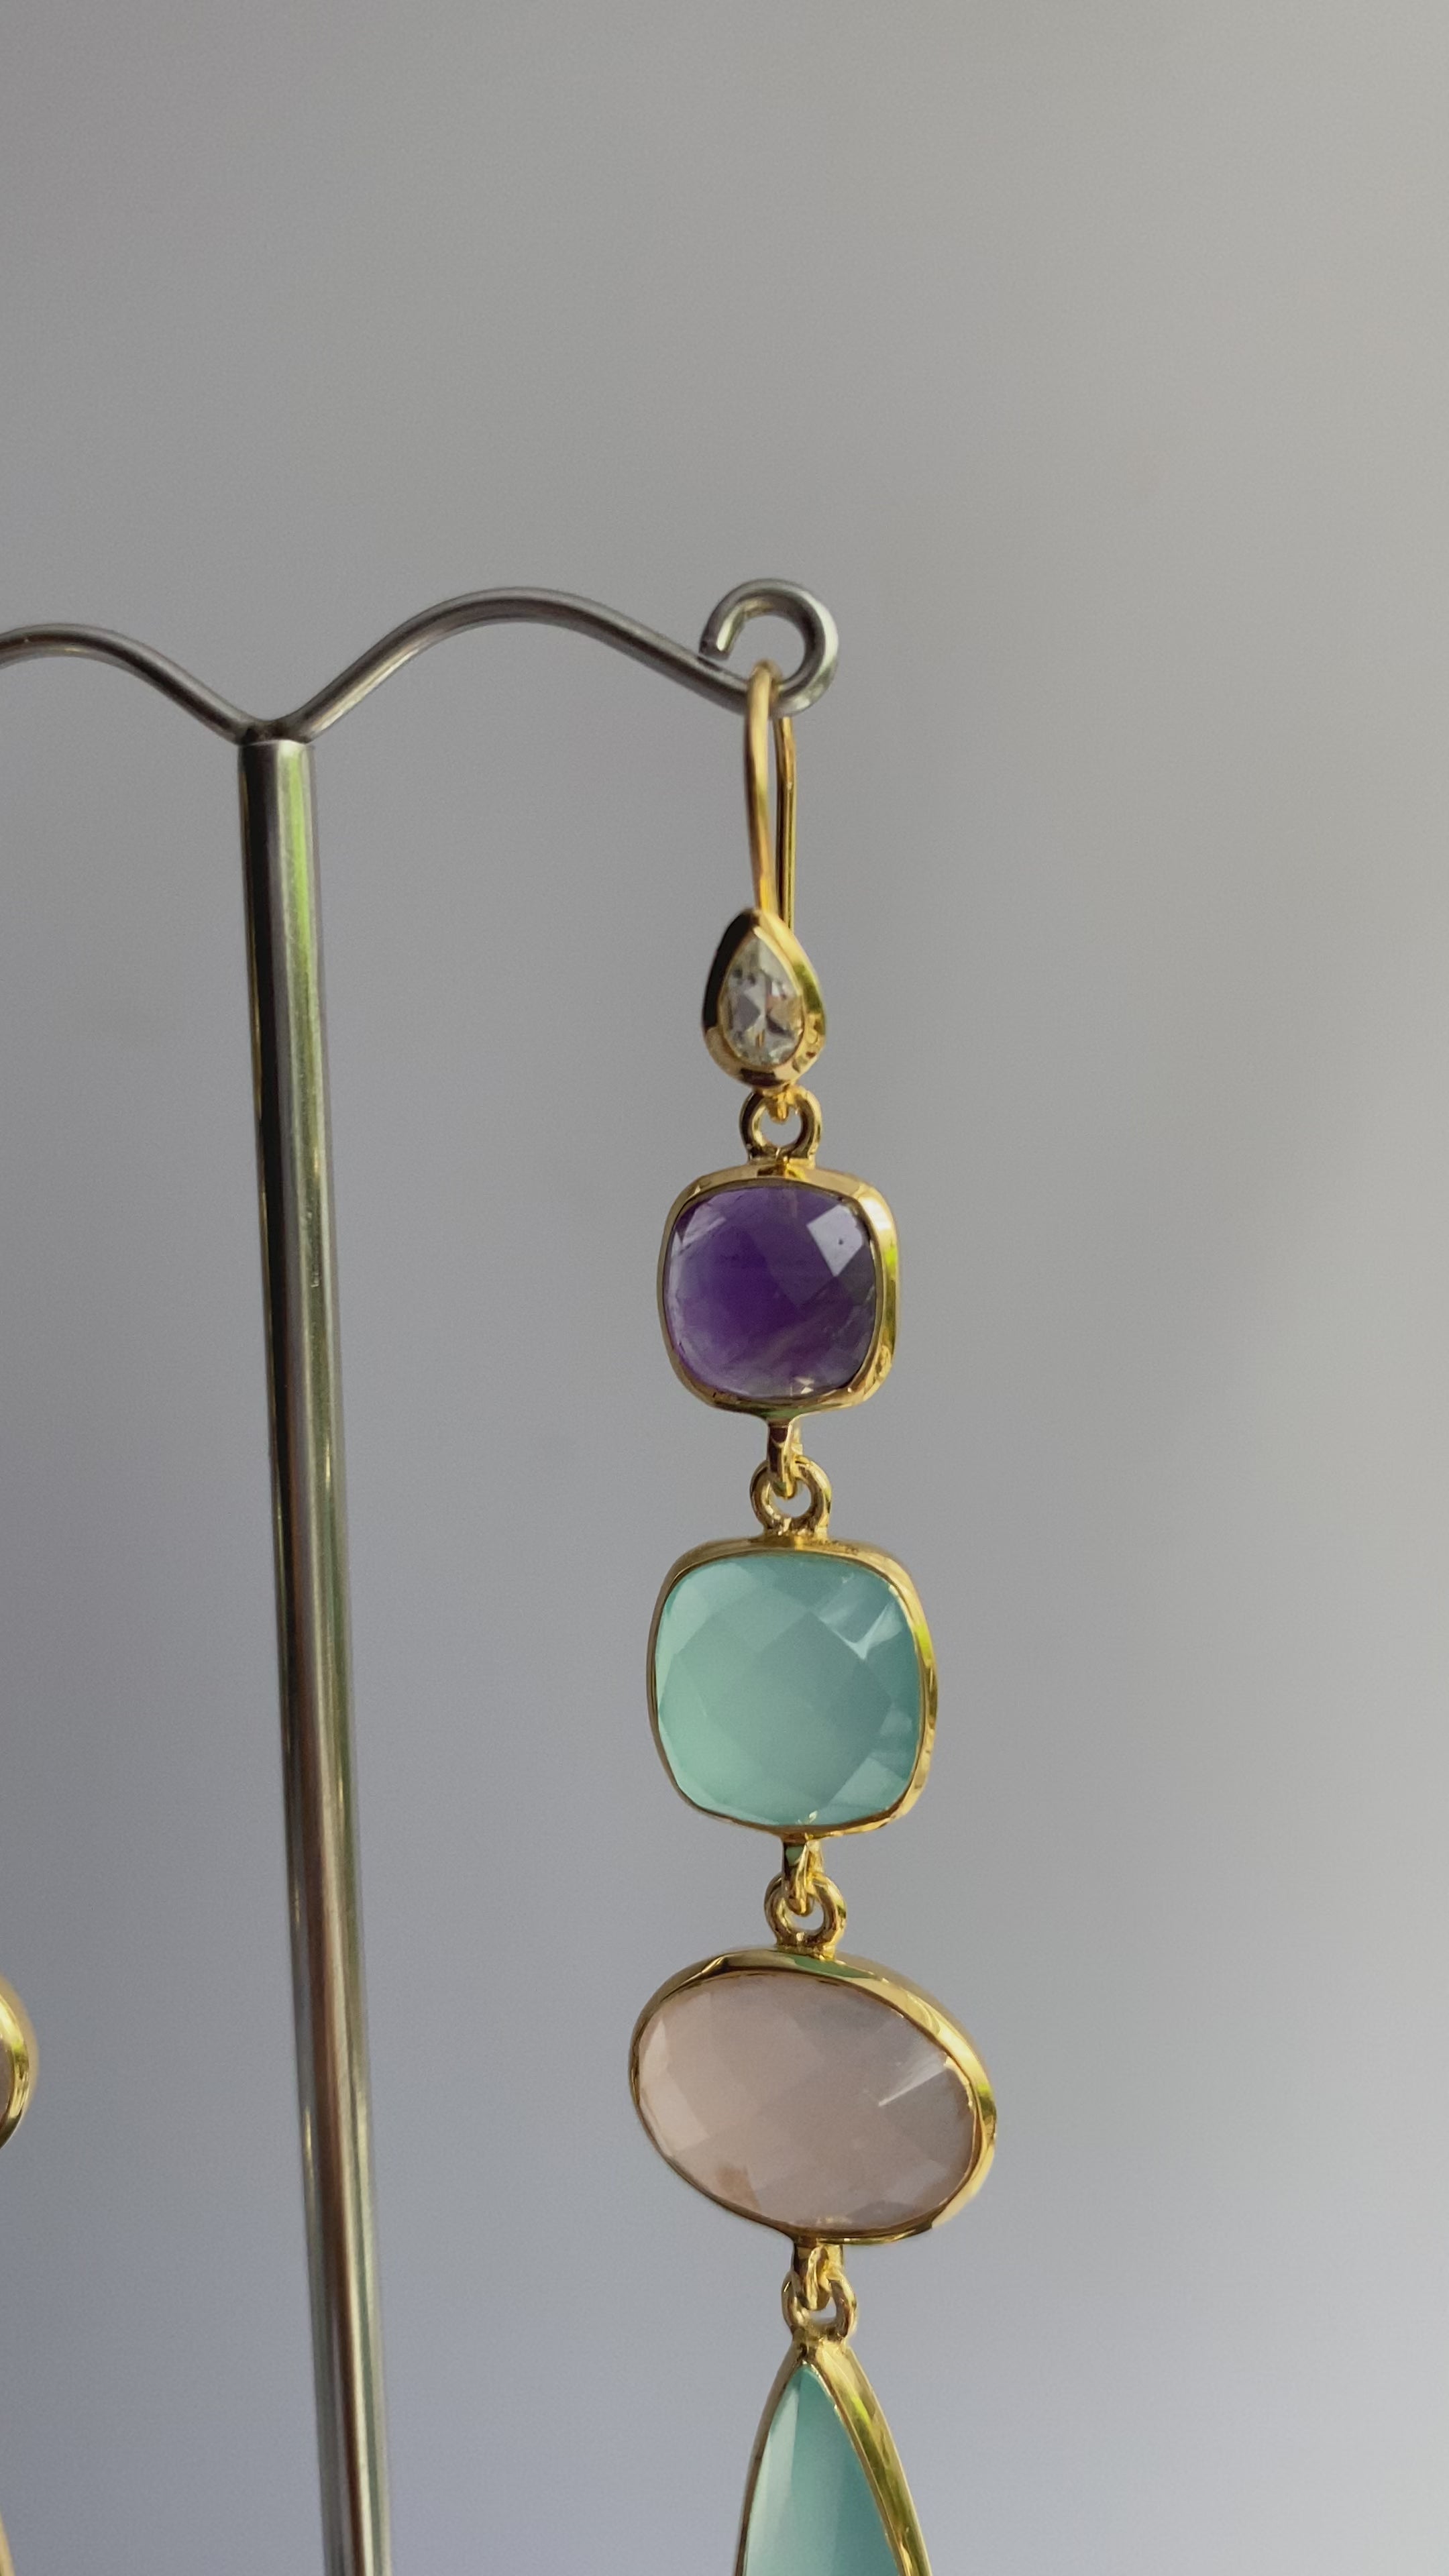 Gold Plated Sterling Silver Long Gemstone Earrings with Amethyst, Aqua Chalcedony and Rose Quartz